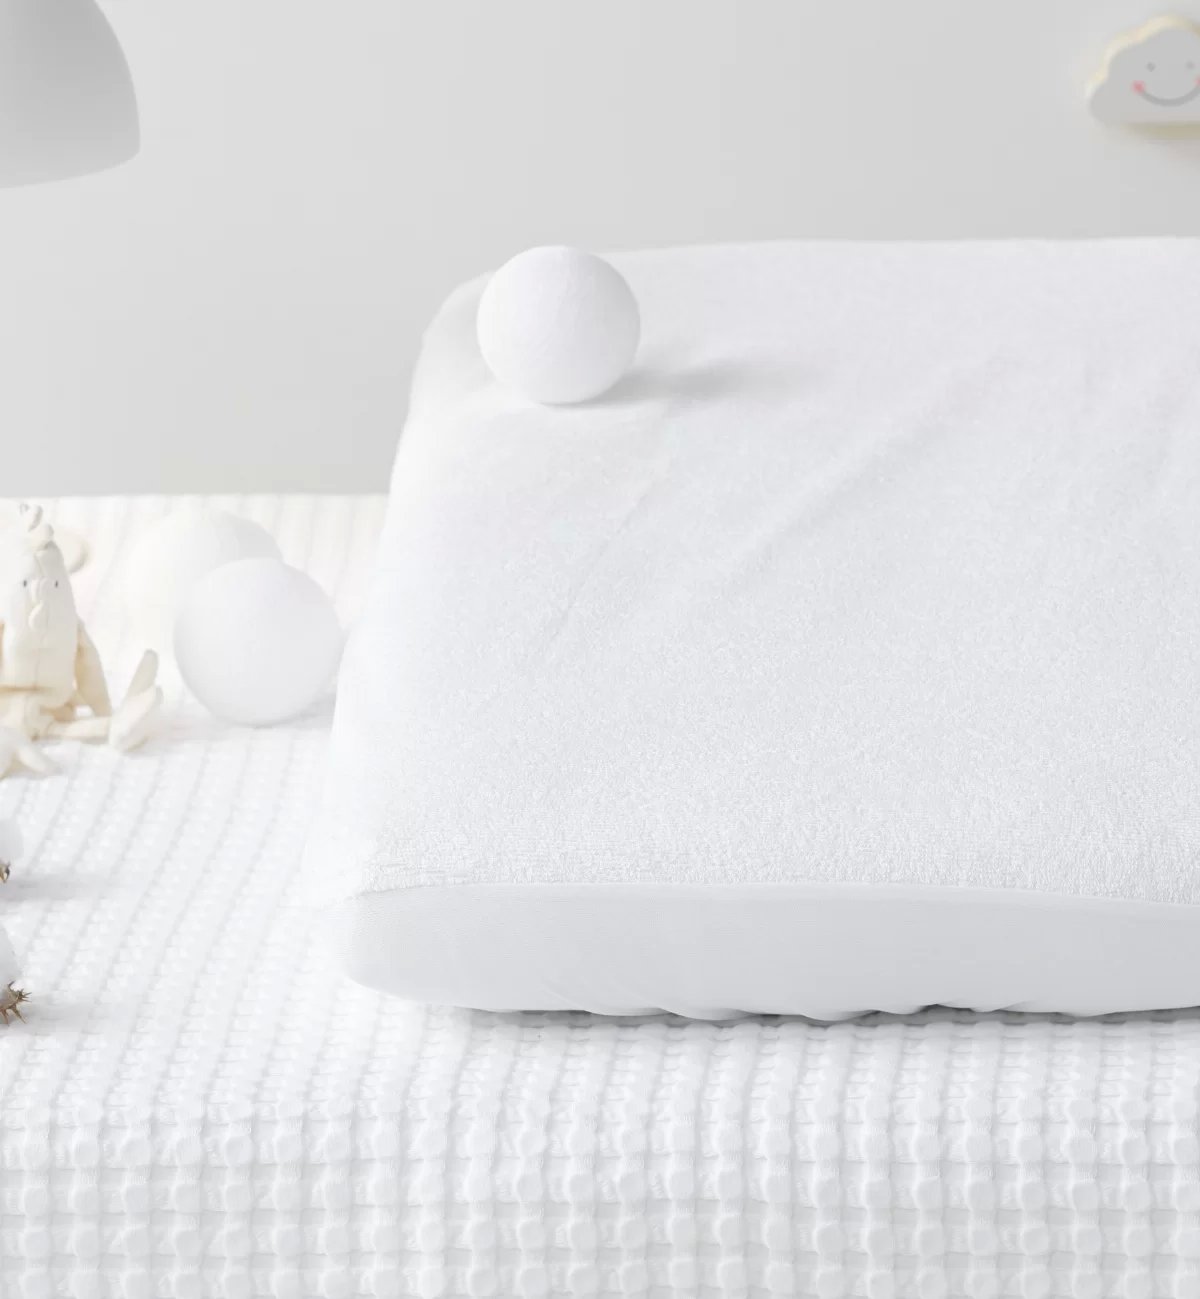 How do I clean my child's mattress after bedwetting? Kadolis